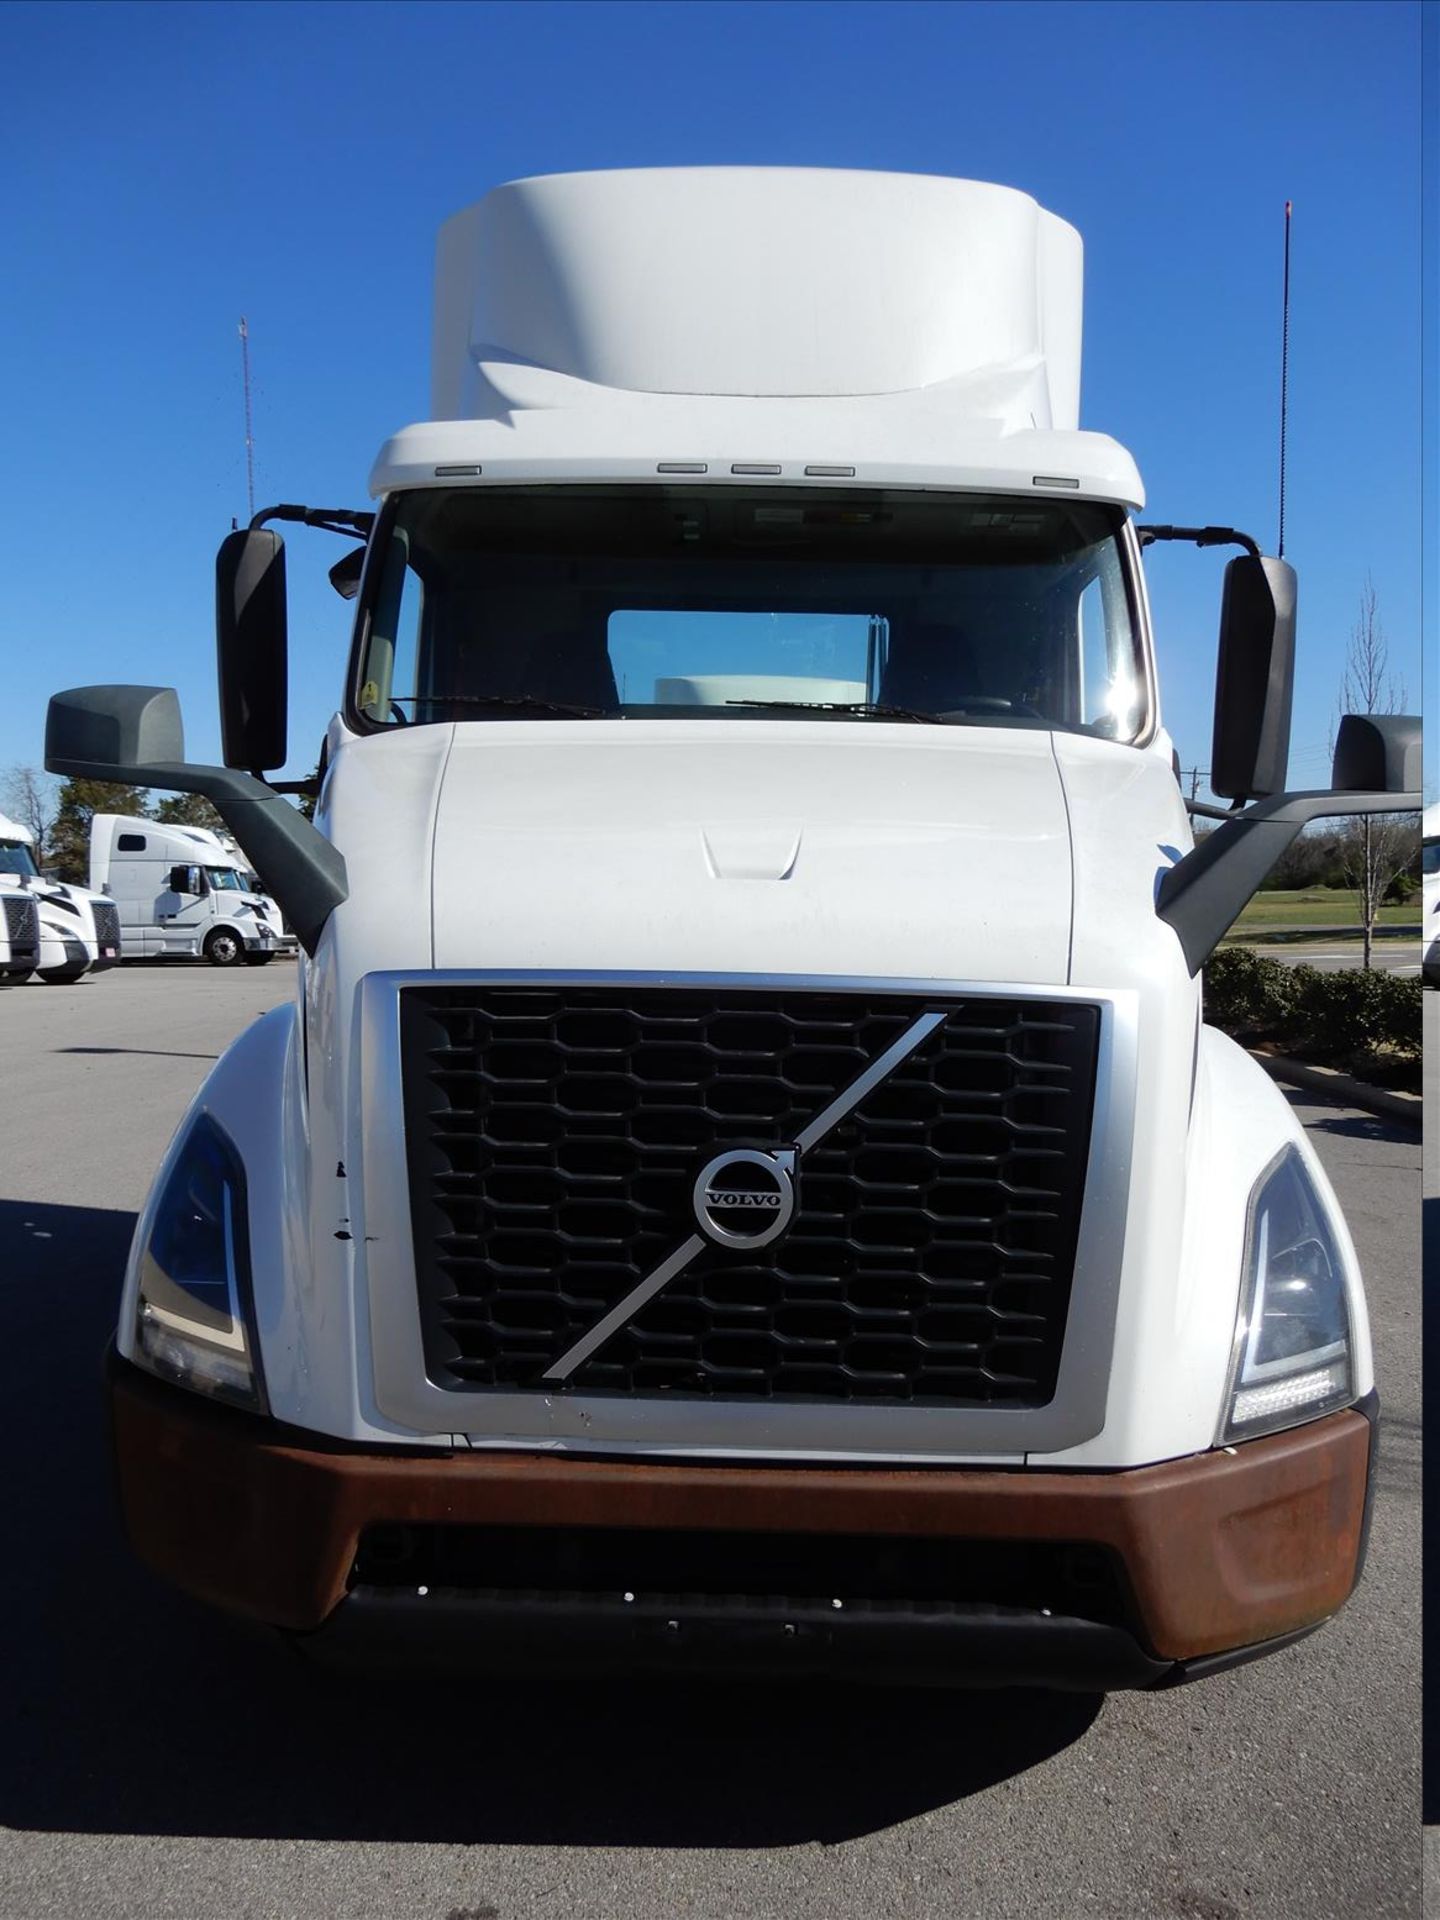 2019 Volvo VNR 300 Daycab Truck Tractor - Located in Murfreesboro, TN - Image 2 of 58